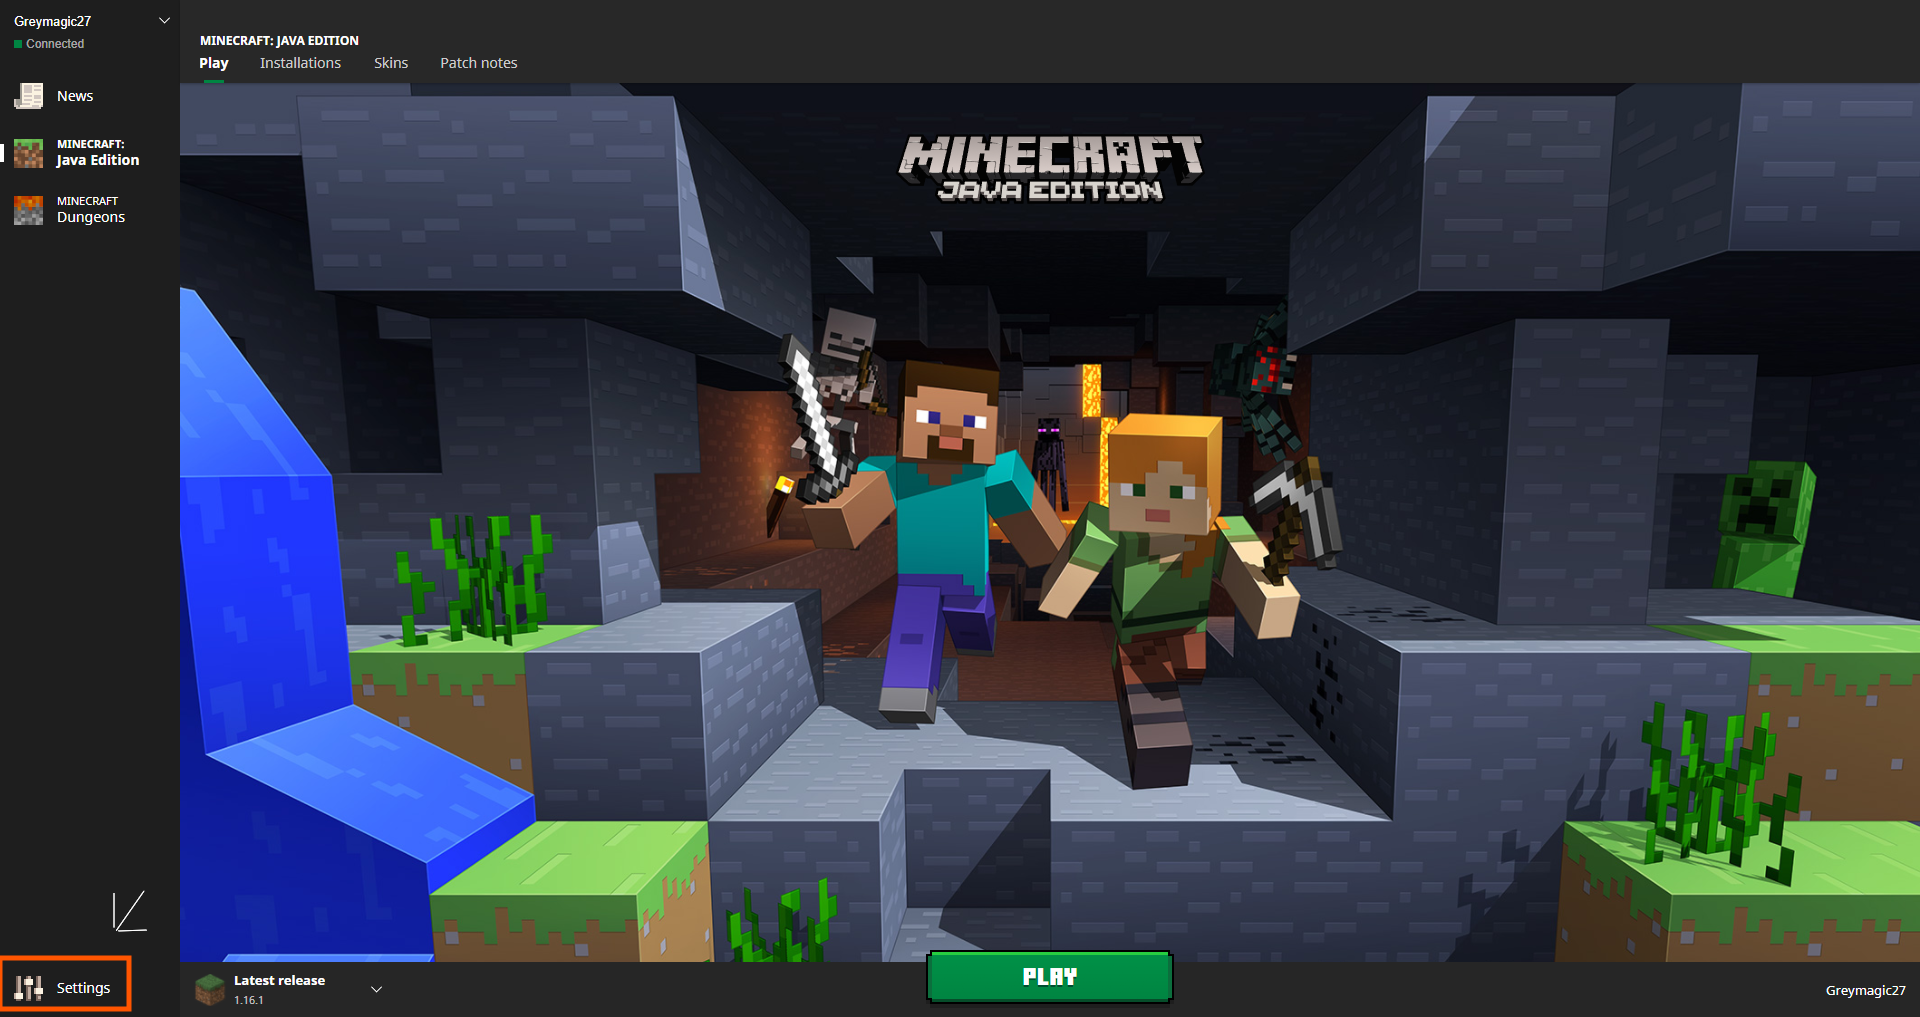 Minecraft launcher showing Settings button